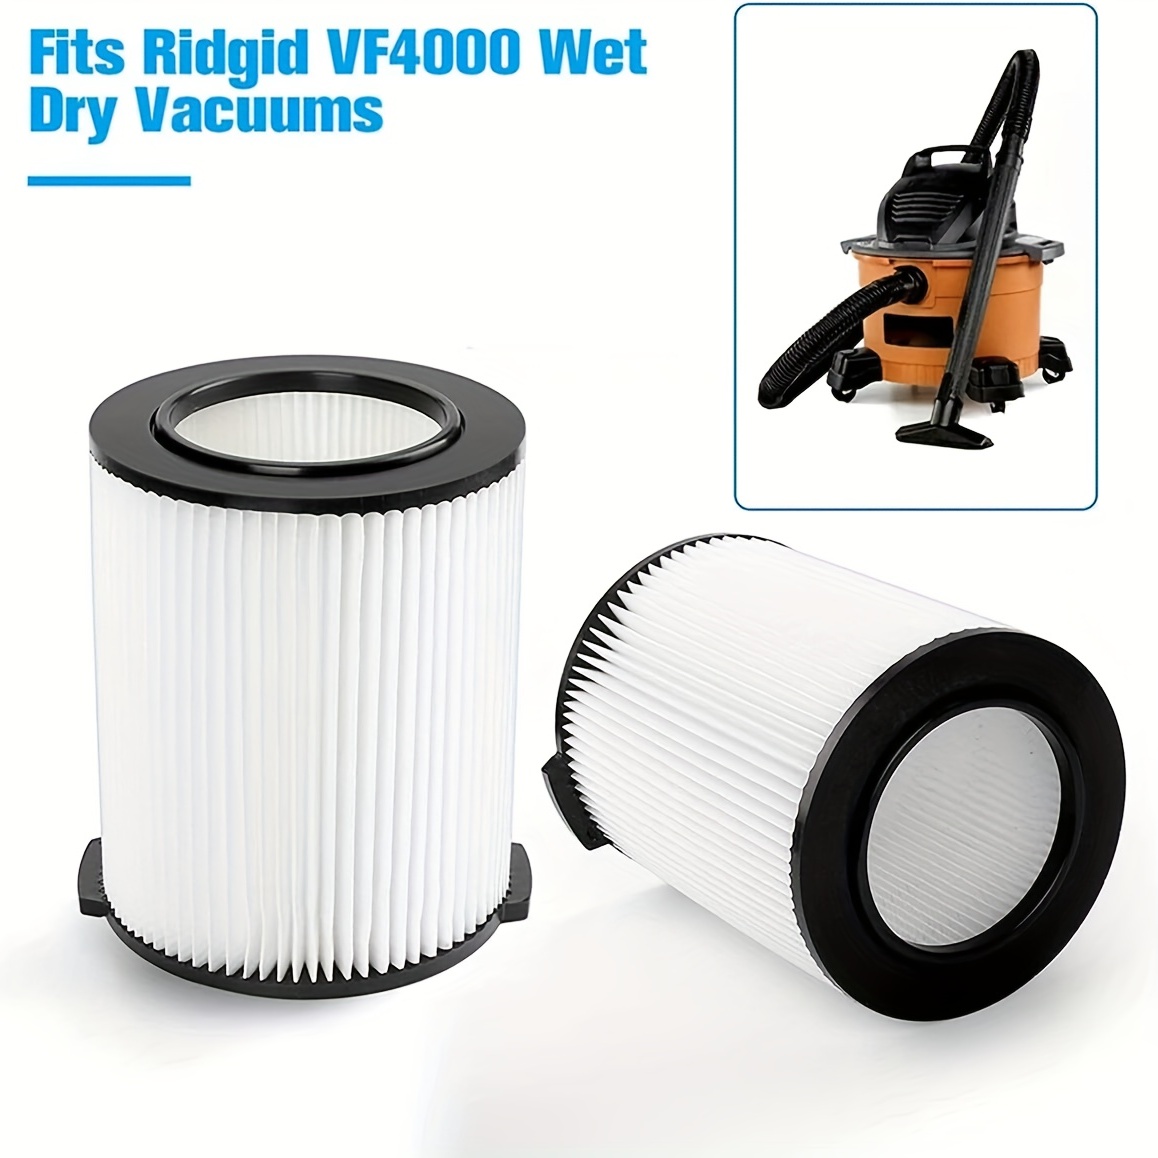 1 Pack Hnvcf10 Replacement Filters Compatible With Black And - Temu